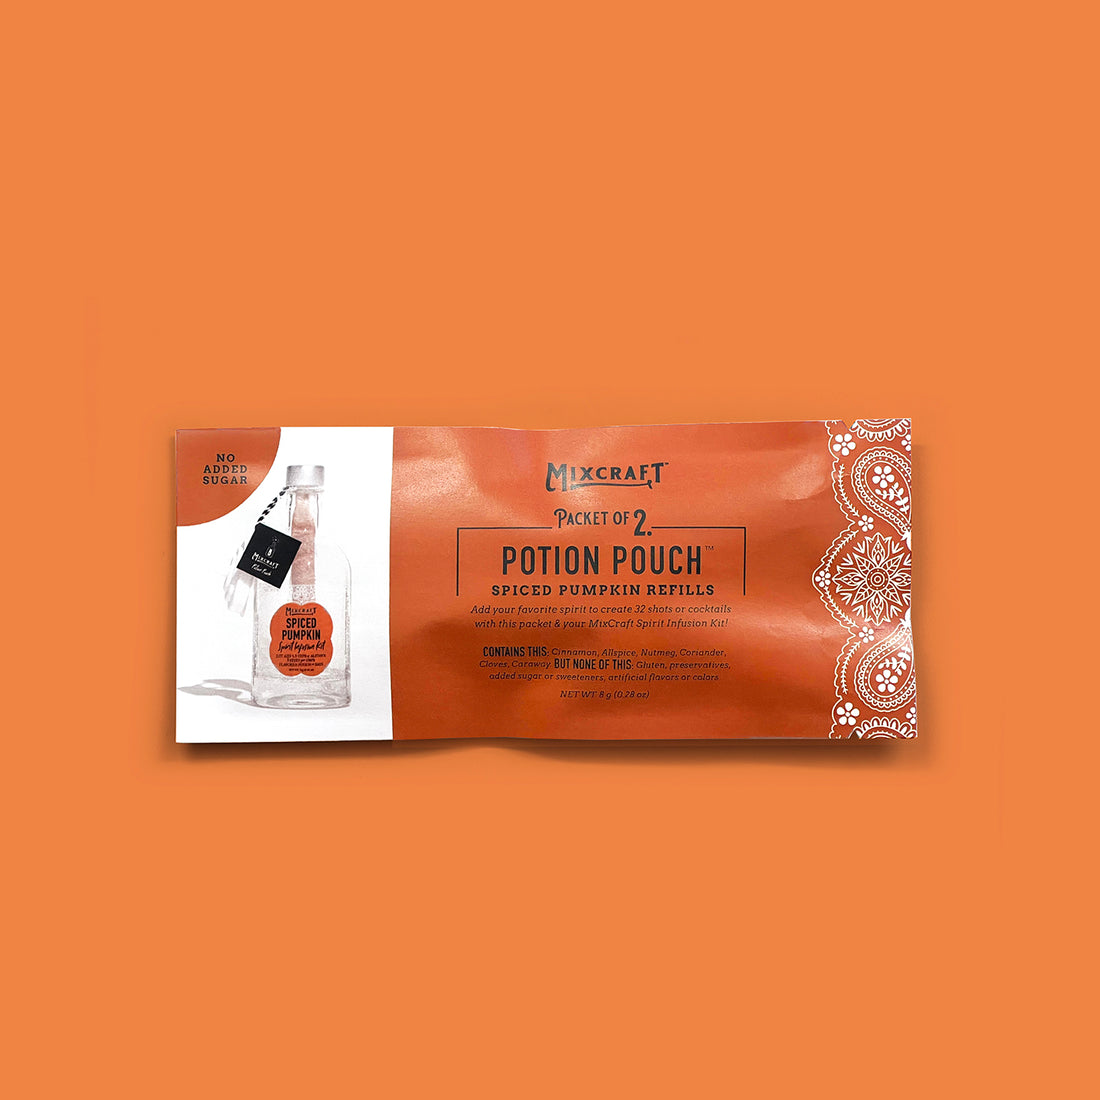 Spiced Pumpkin refill (containing 2 Potion Pouches) included in gift set